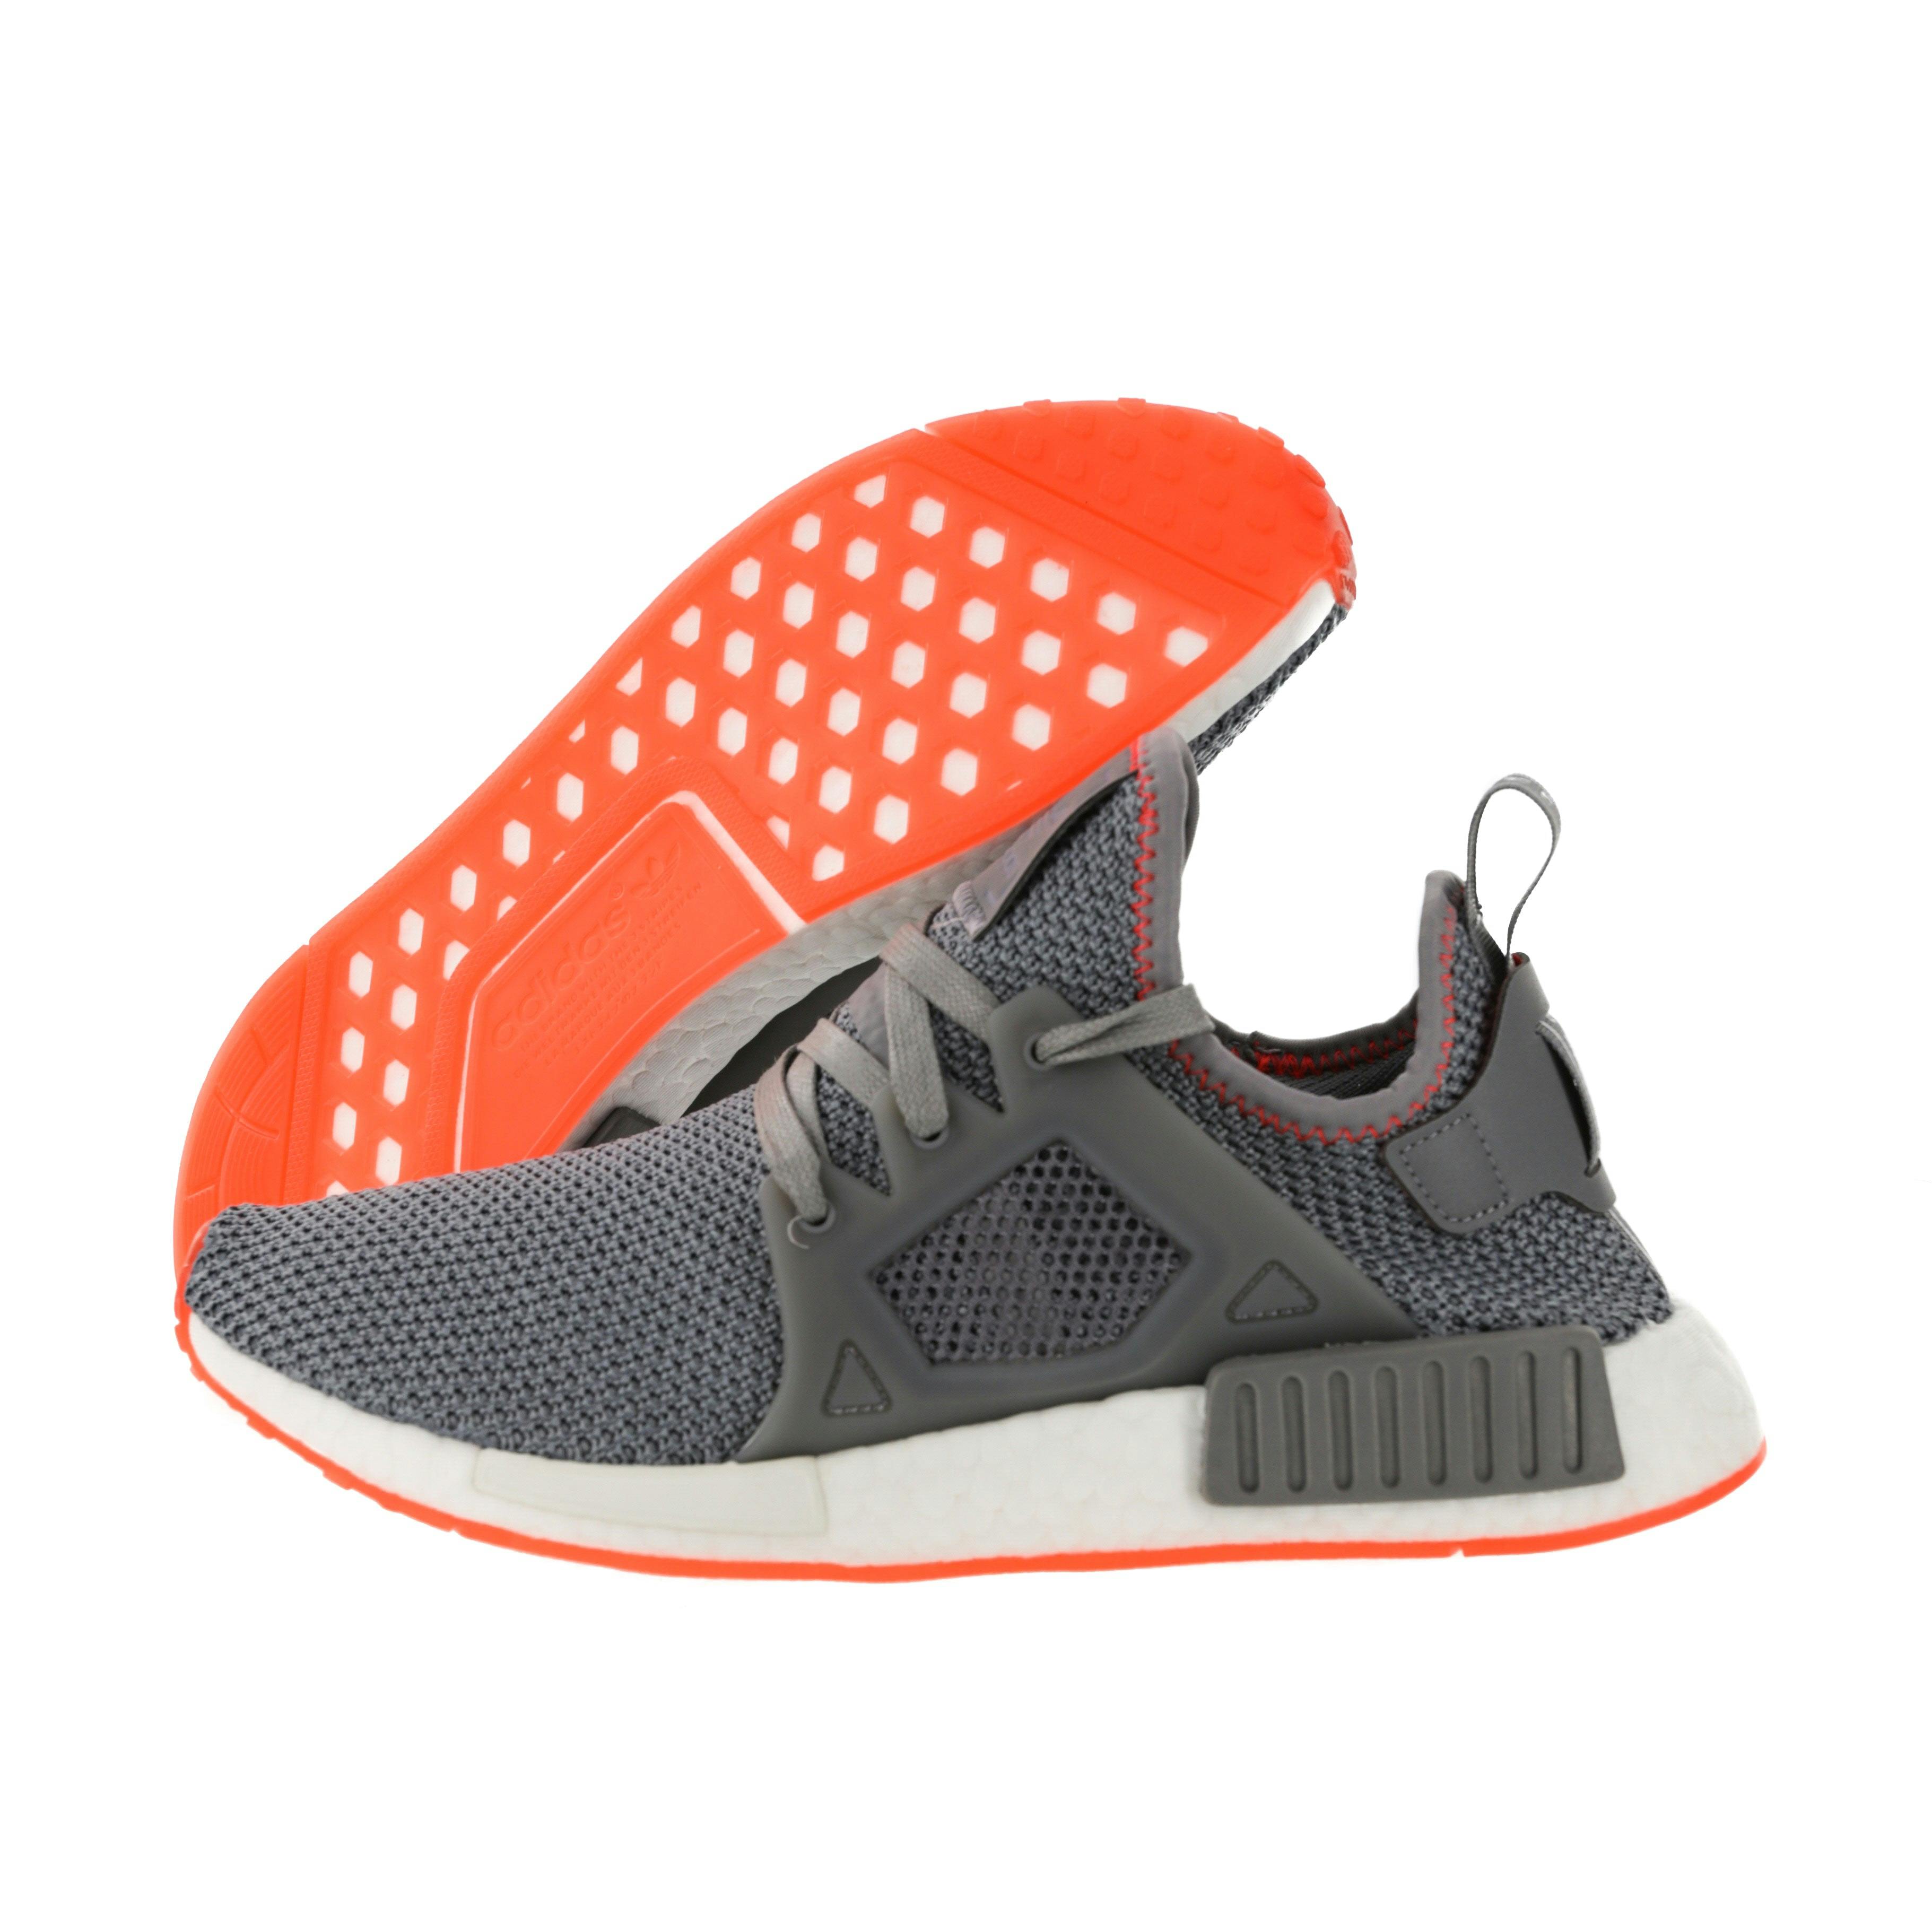 Adidas Originals NMD XR1 Grey/White/Red | Culture Kings NZ